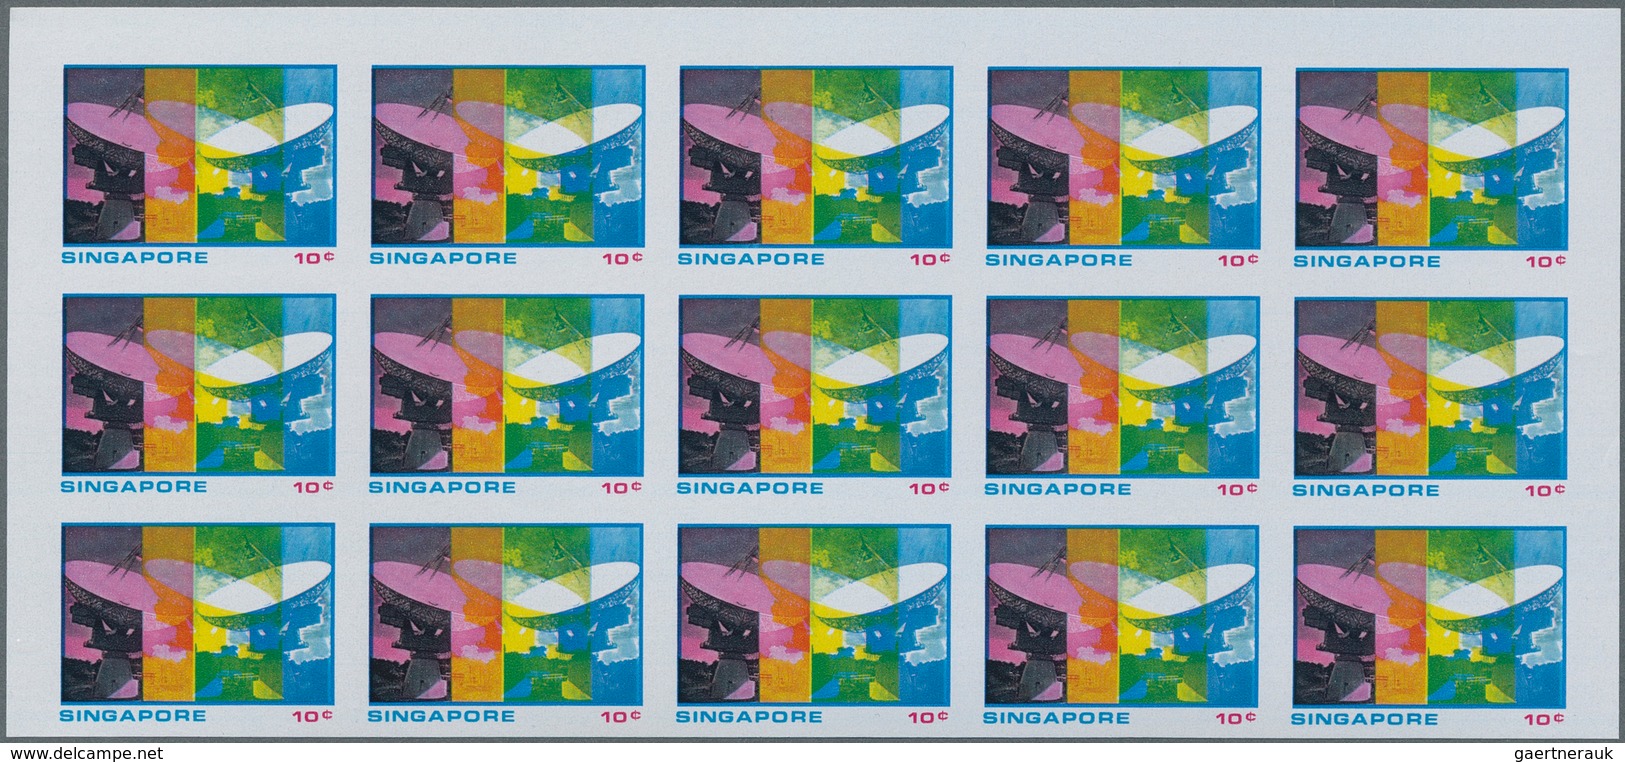 Singapur: 1973/1975, lot of 5224 IMPERFORATE (instead of perforate) stamps and souvenir sheets MNH,